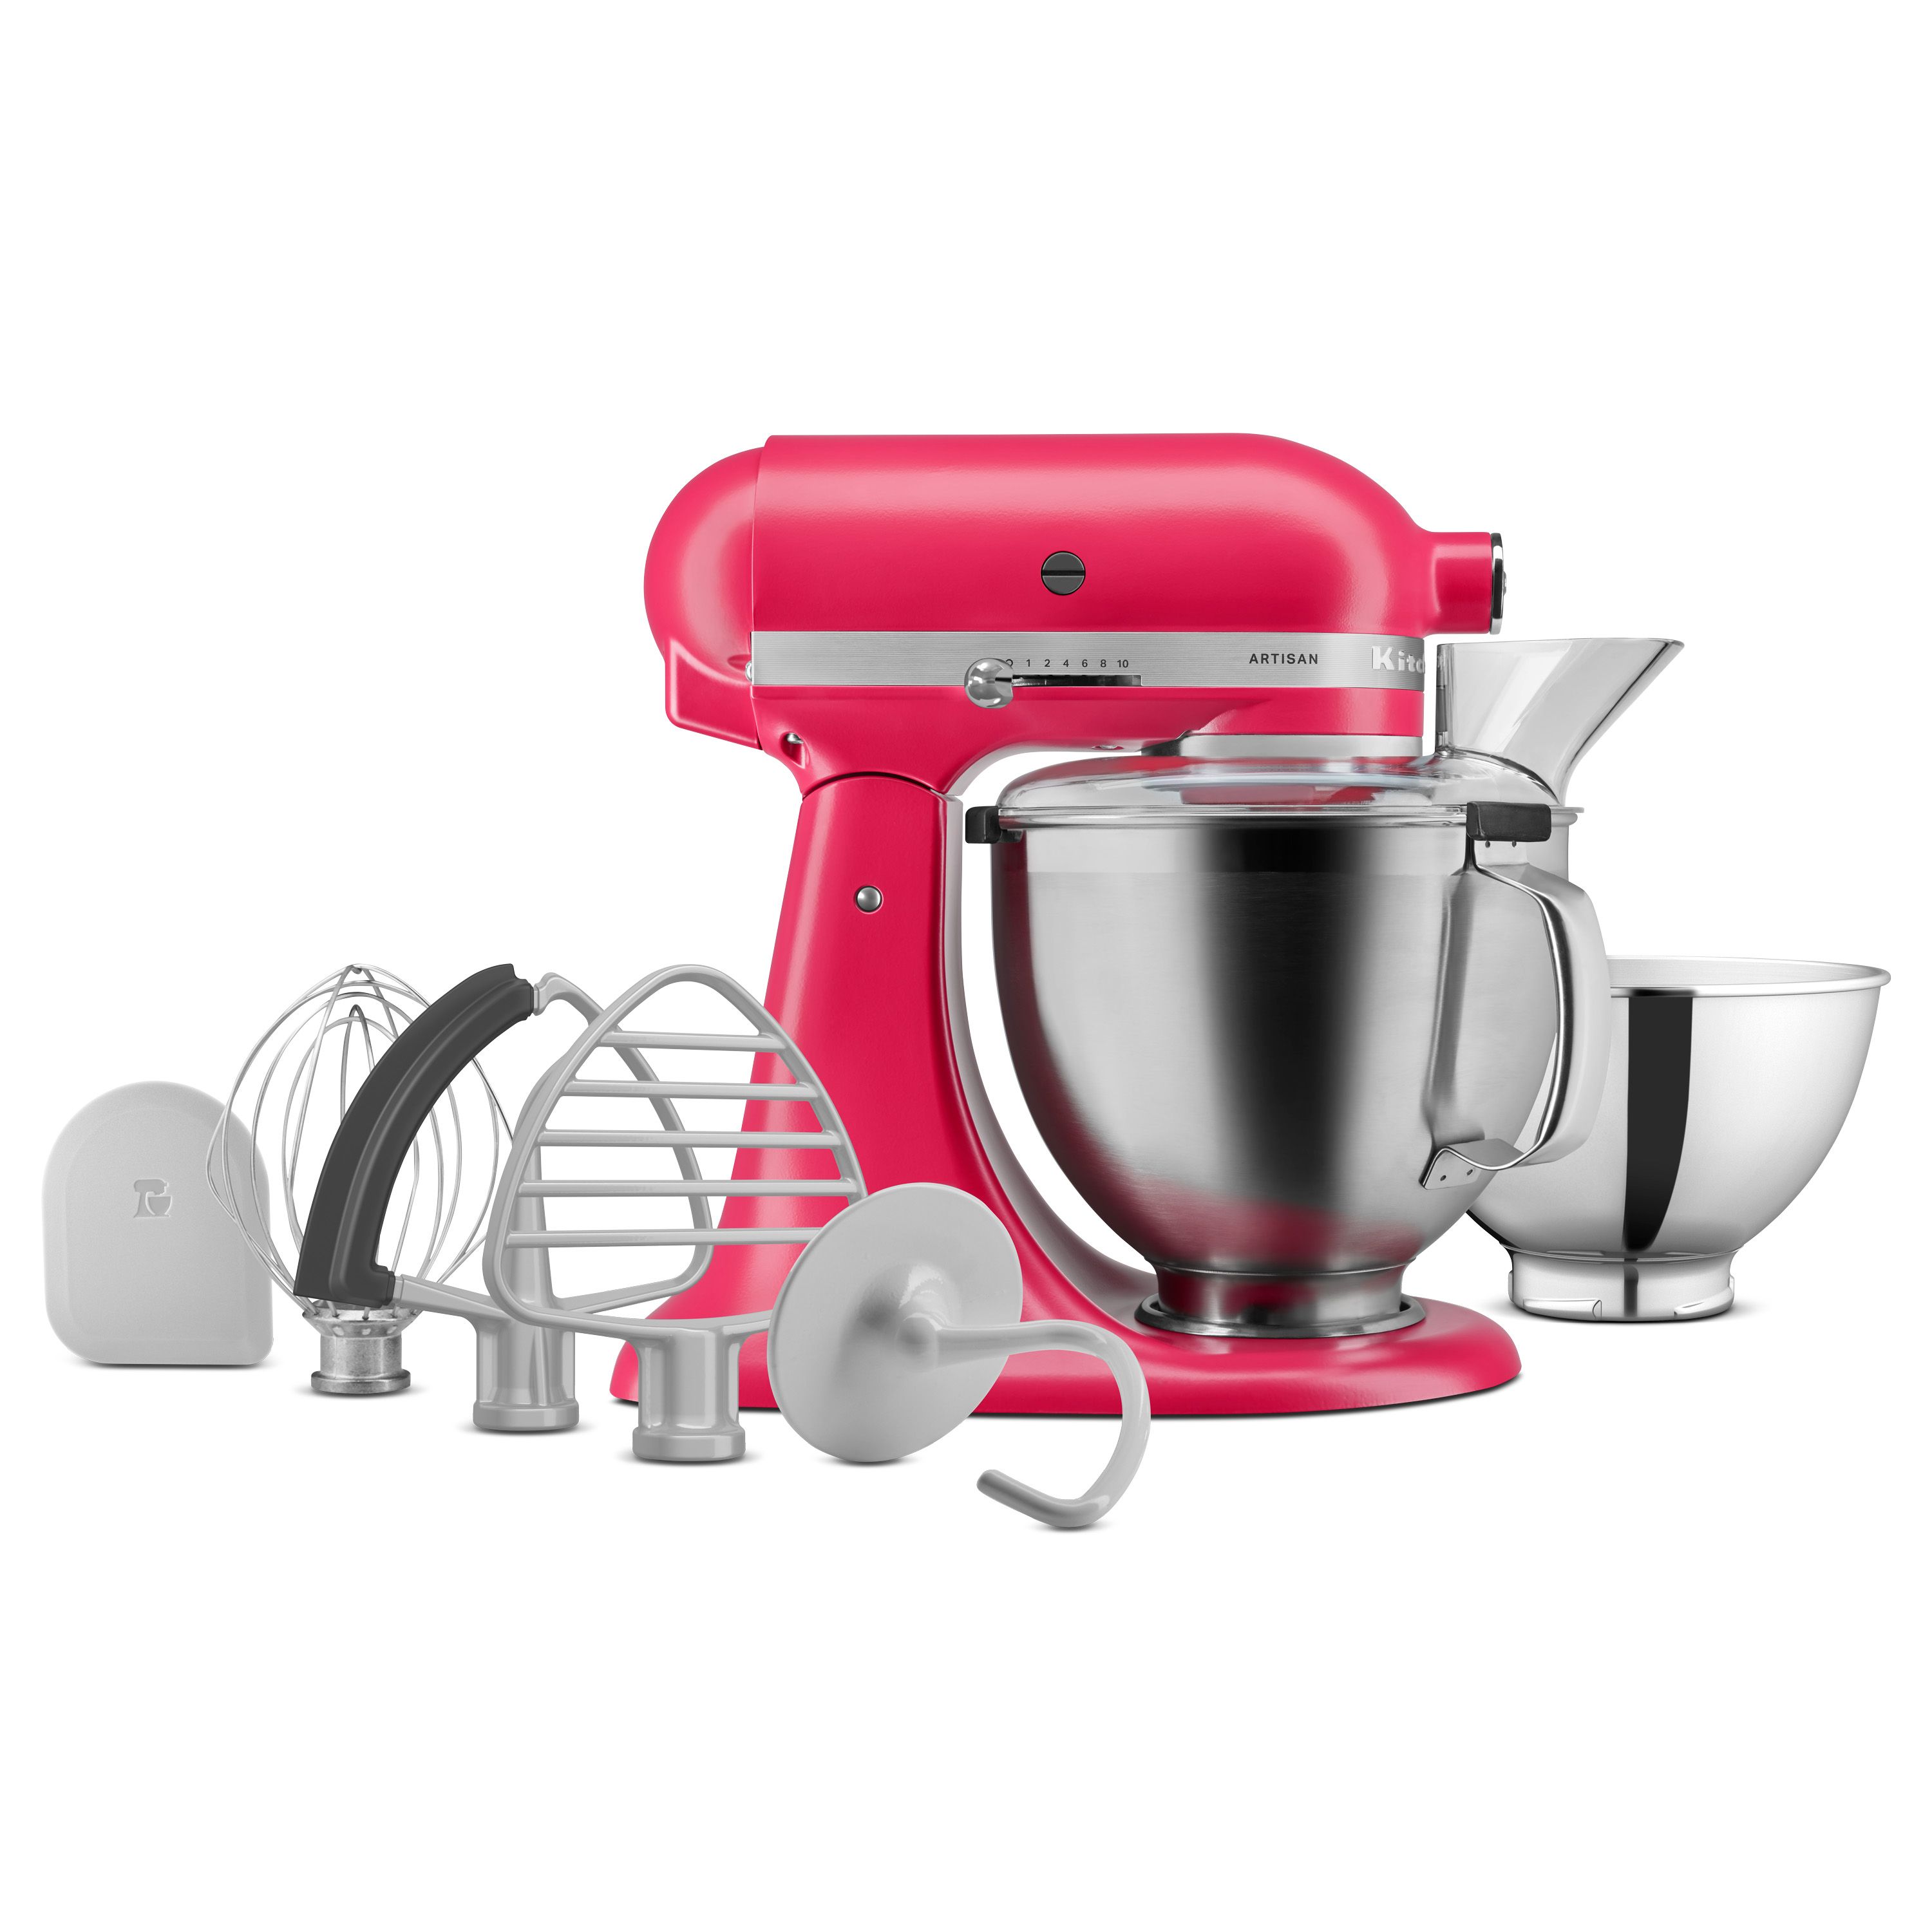 Add a pop of color to your kitchen! 🌺✨ Secure your KitchenAid